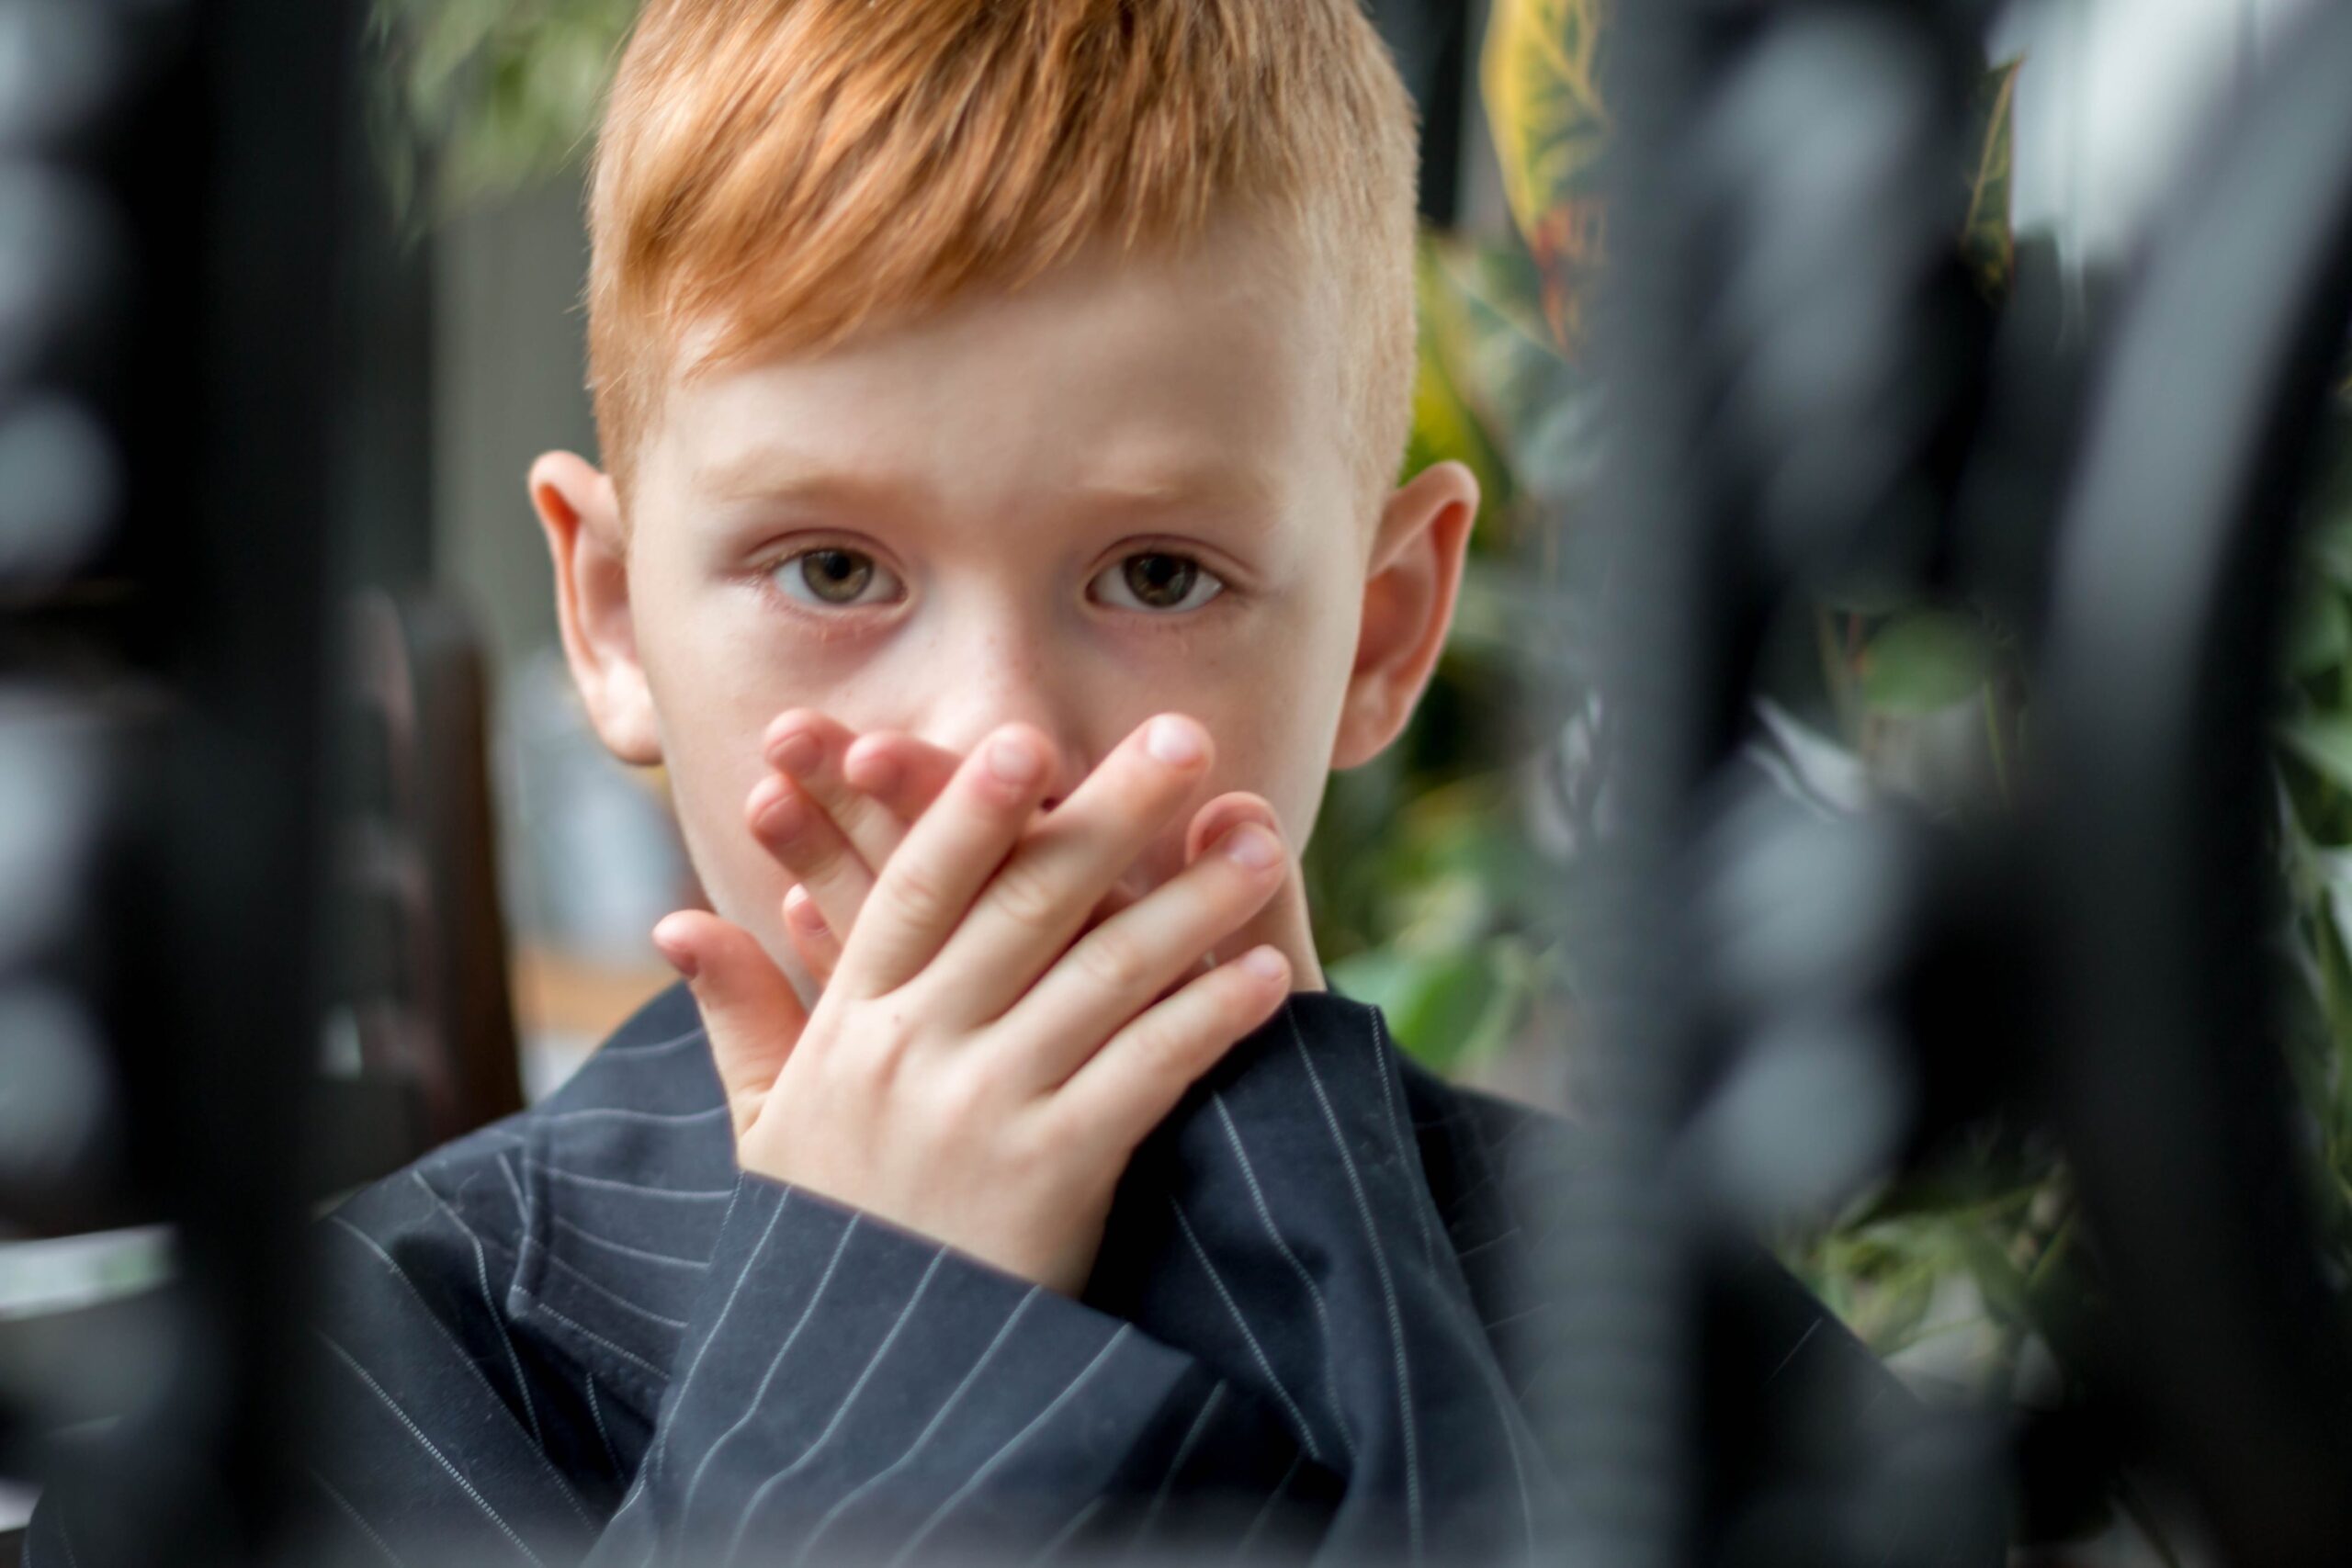 anxious little boy with red hair putting his hands over his mouth